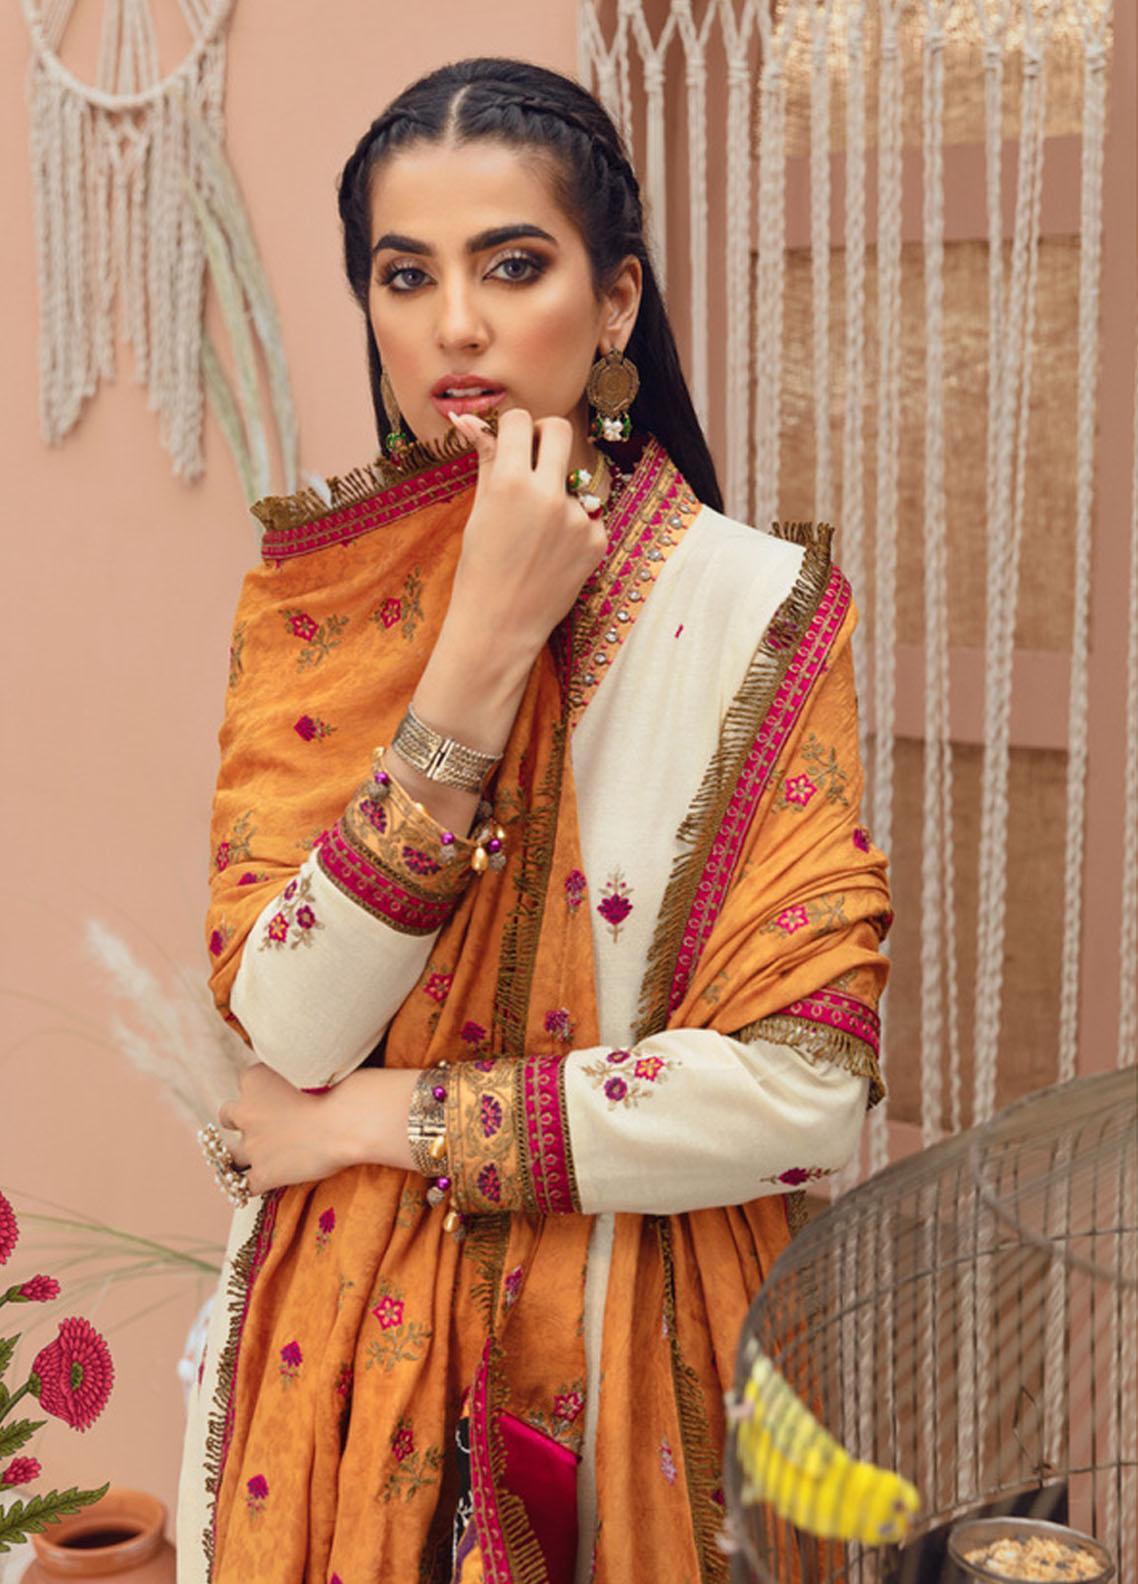 Noor by Saadia Asad Embroidered Karandi Suit Unstitched 3 Piece 06 – Winter Collection